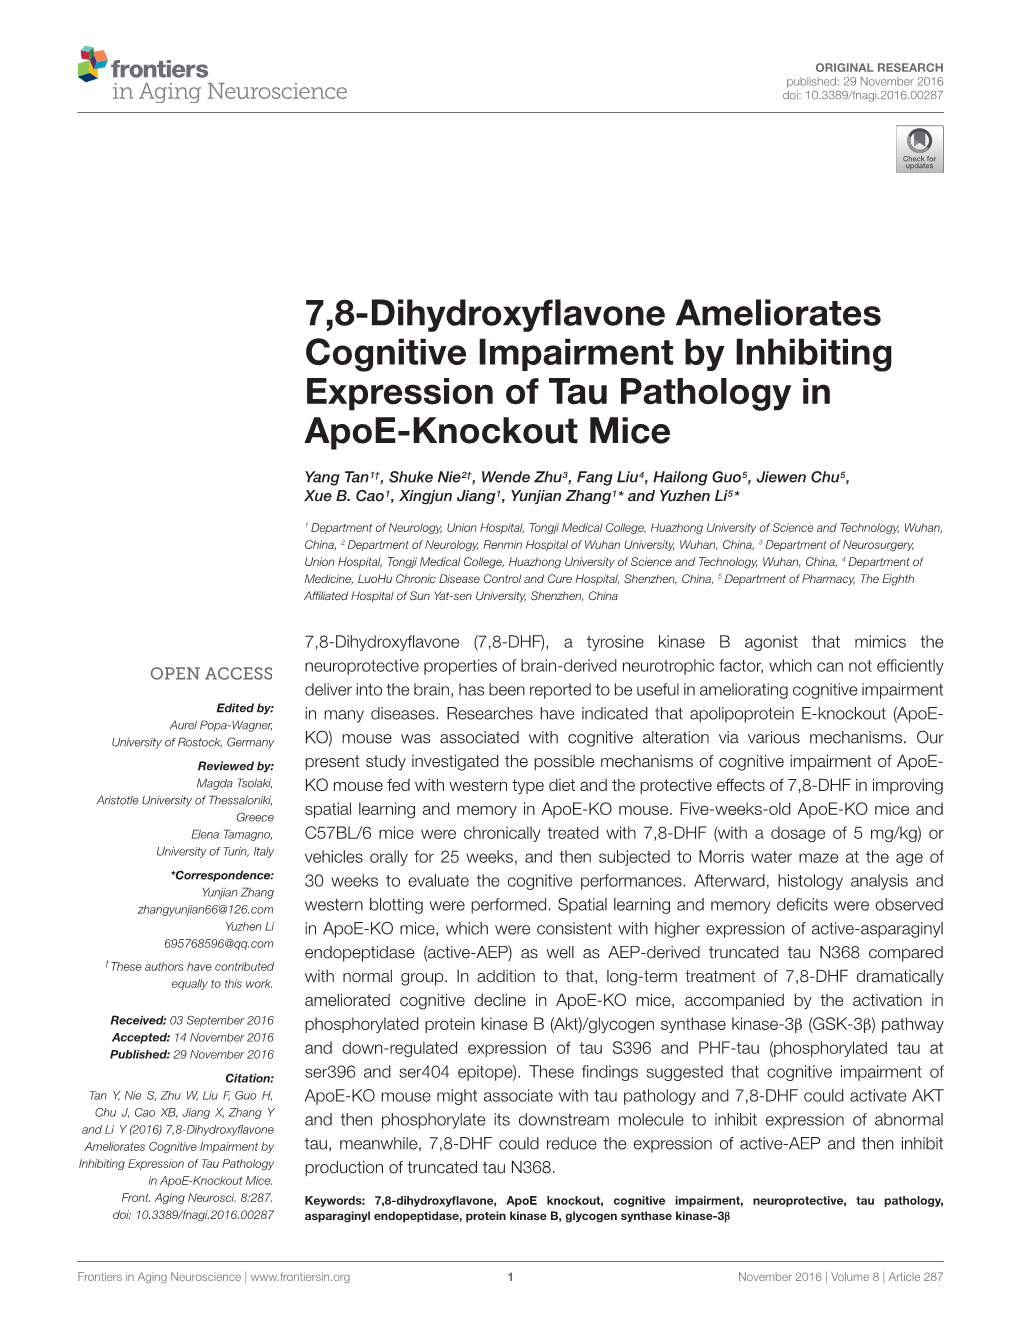 7,8-Dihydroxyflavone Ameliorates Cognitive Impairment by Inhibiting